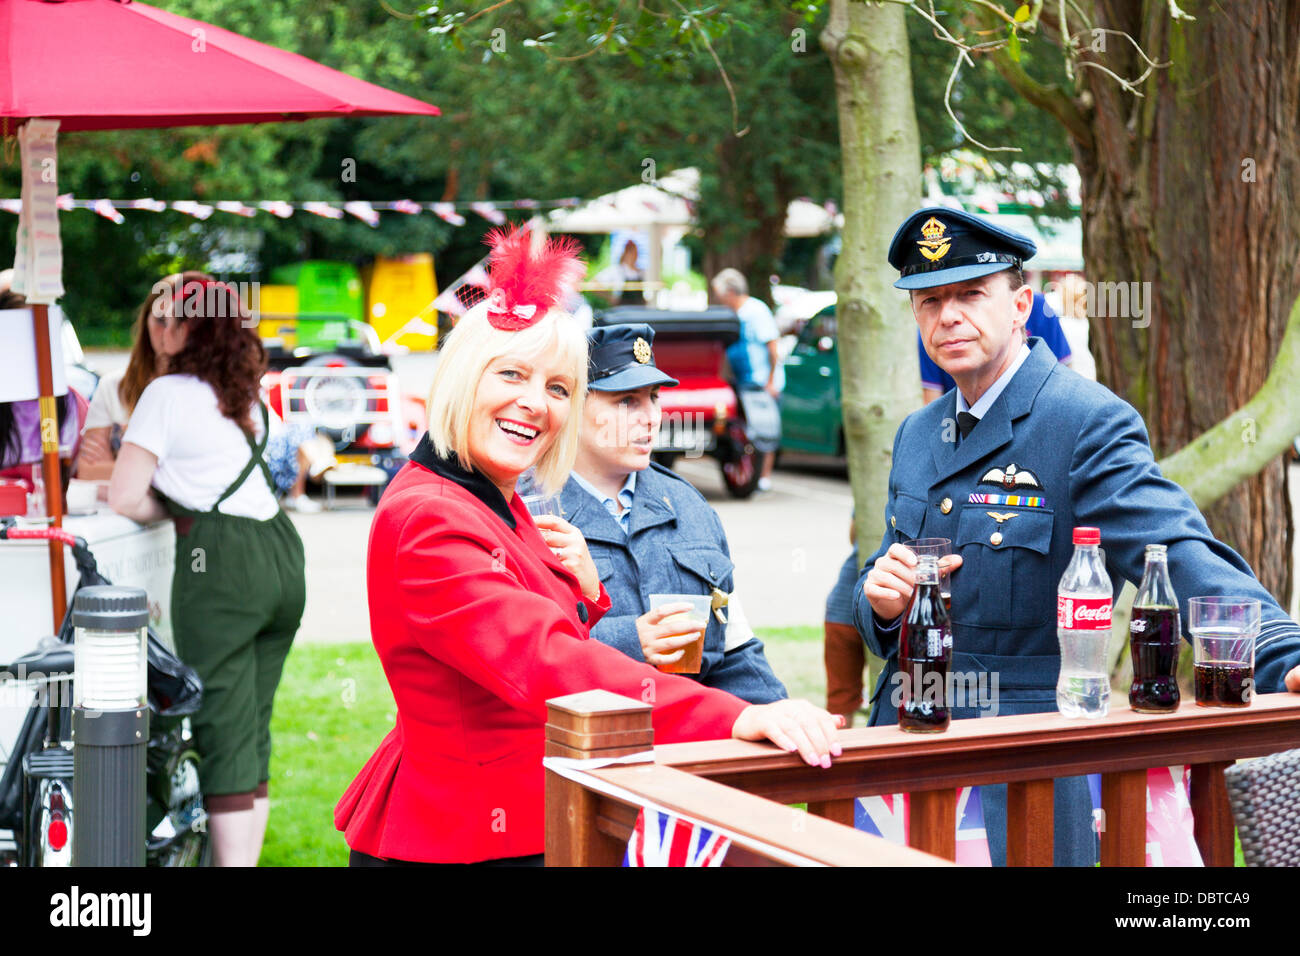 Woodhall Spa. 4th August, 2013. Woodhall Spa 1940's weekend 4/08/2013 Lincolnshire Village UK England. Local residents dressed in traditional 1940's war time outfits of the era along with war vehicles and cars Credit:  Paul Thompson Live News/Alamy Live News Stock Photo